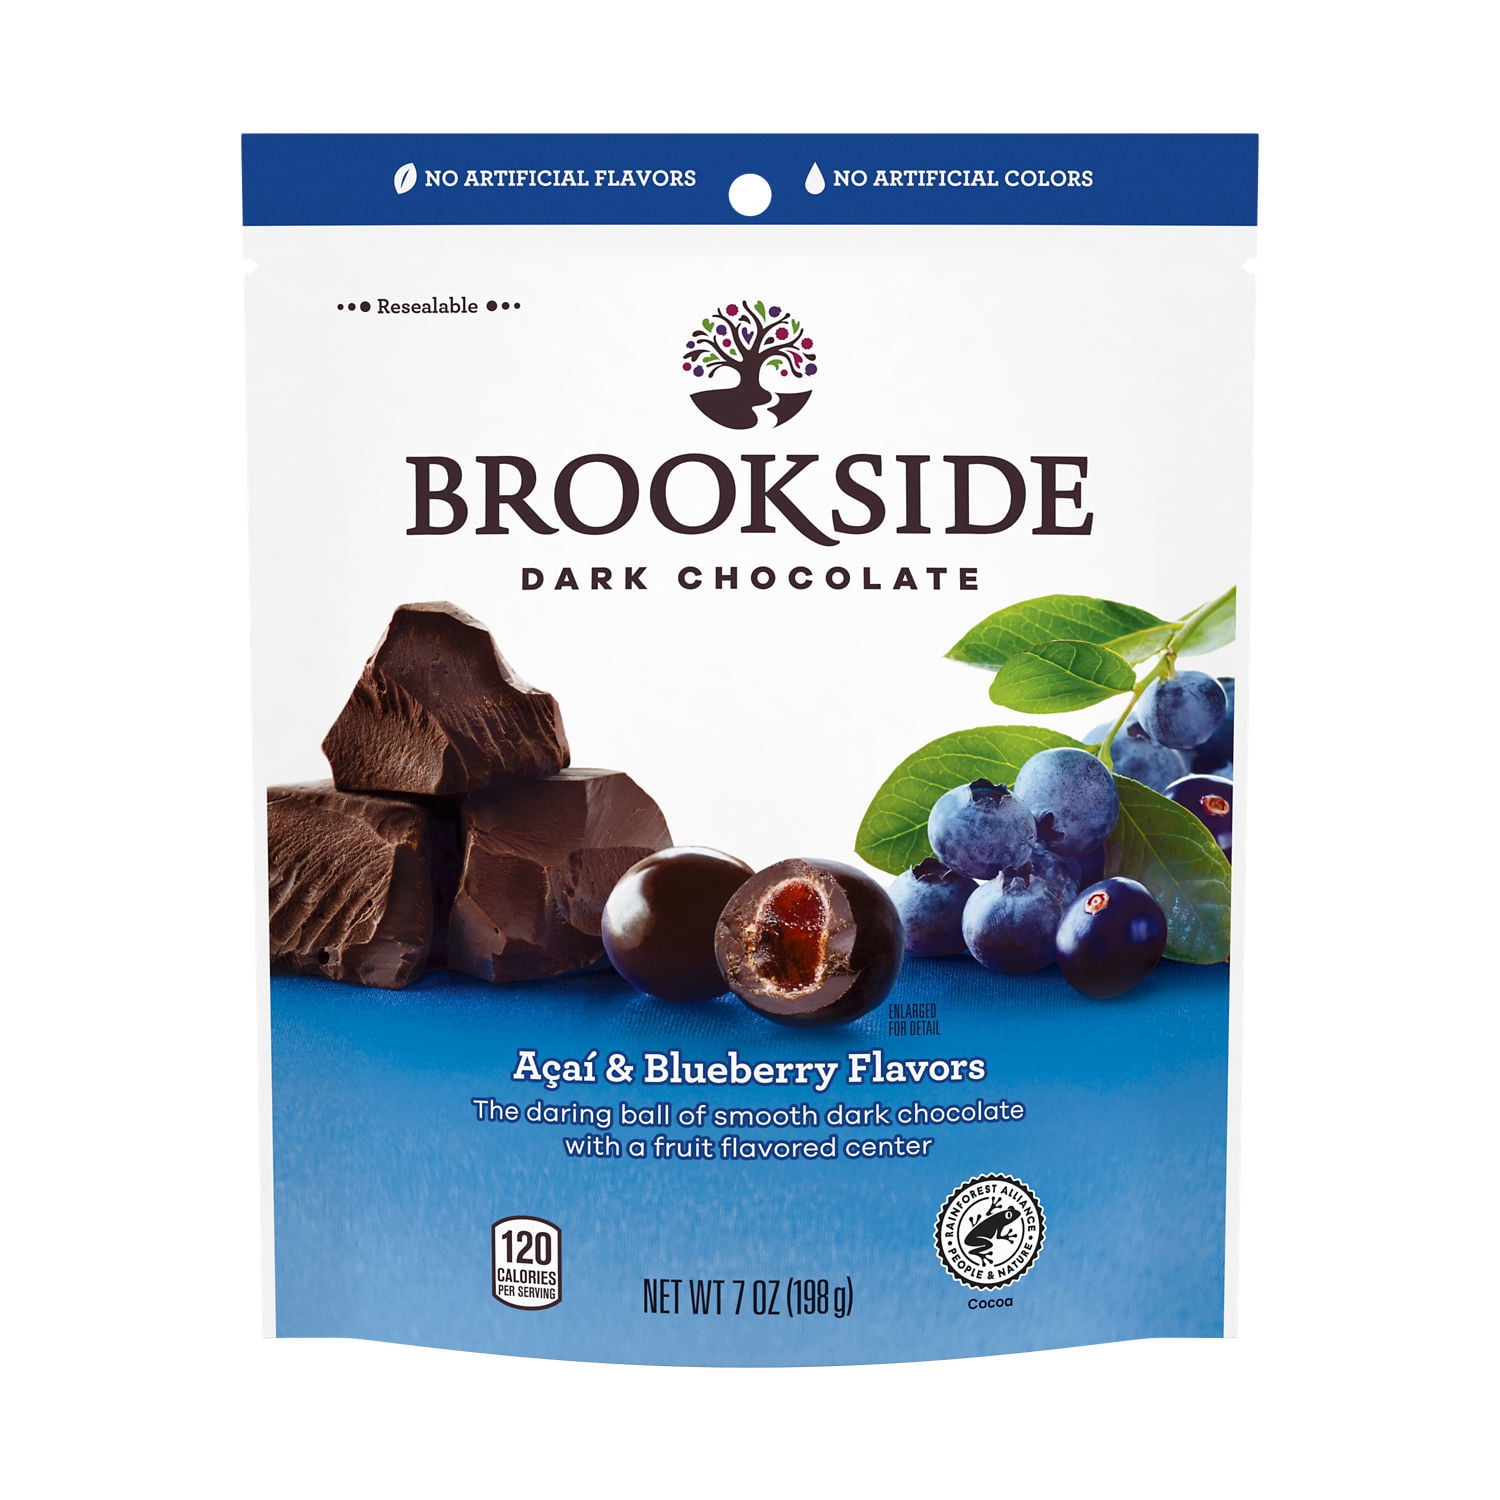 Brookside, Dark Chocolate with Acai and Blueberry Flavors Candy, 7 oz